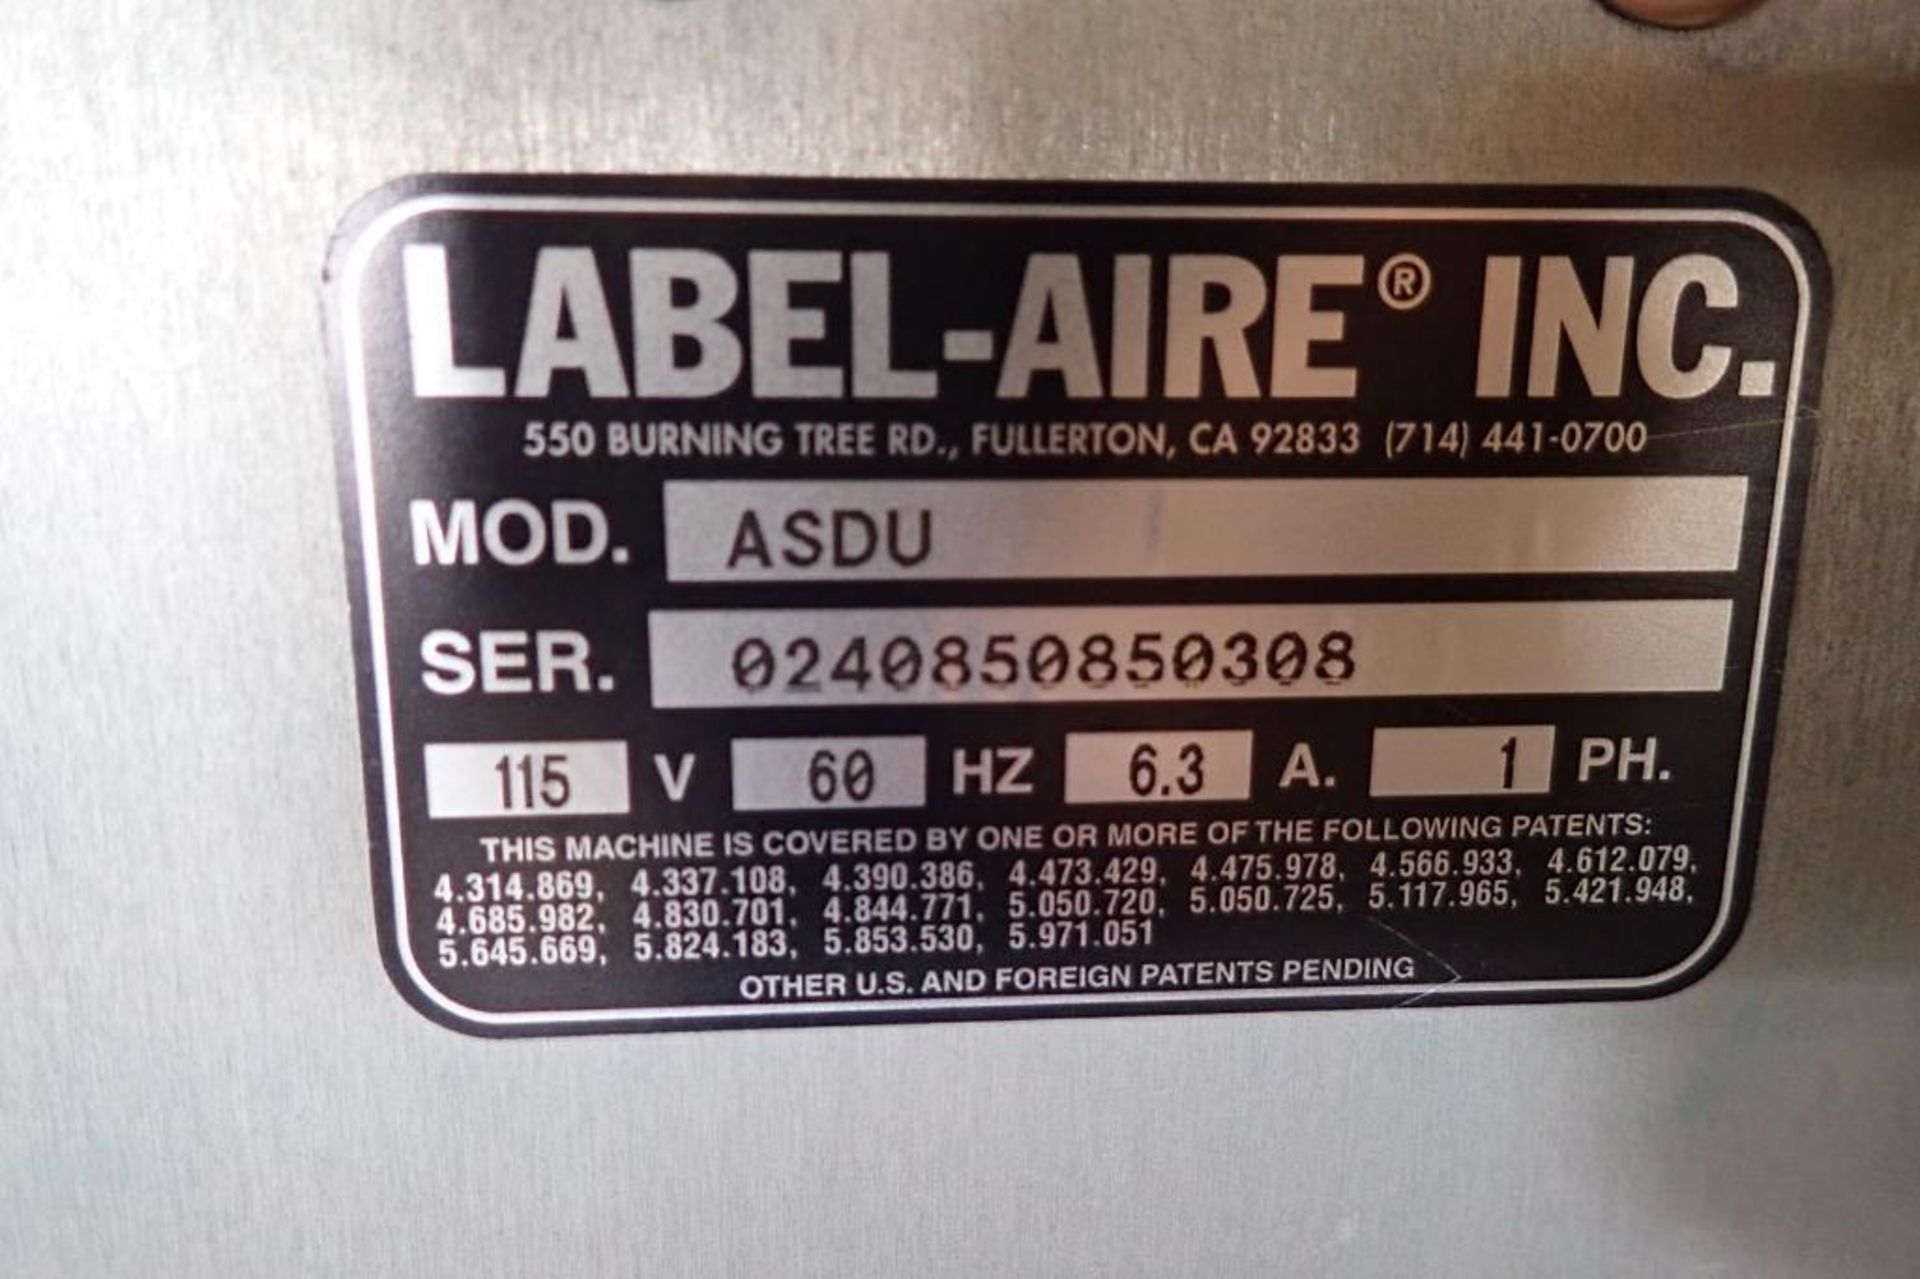 Autolabe labeler, Model 110-S LH REV E, SN 120007, Model 110-S, SN 110613, up to 6 in. wide film { - Image 4 of 10